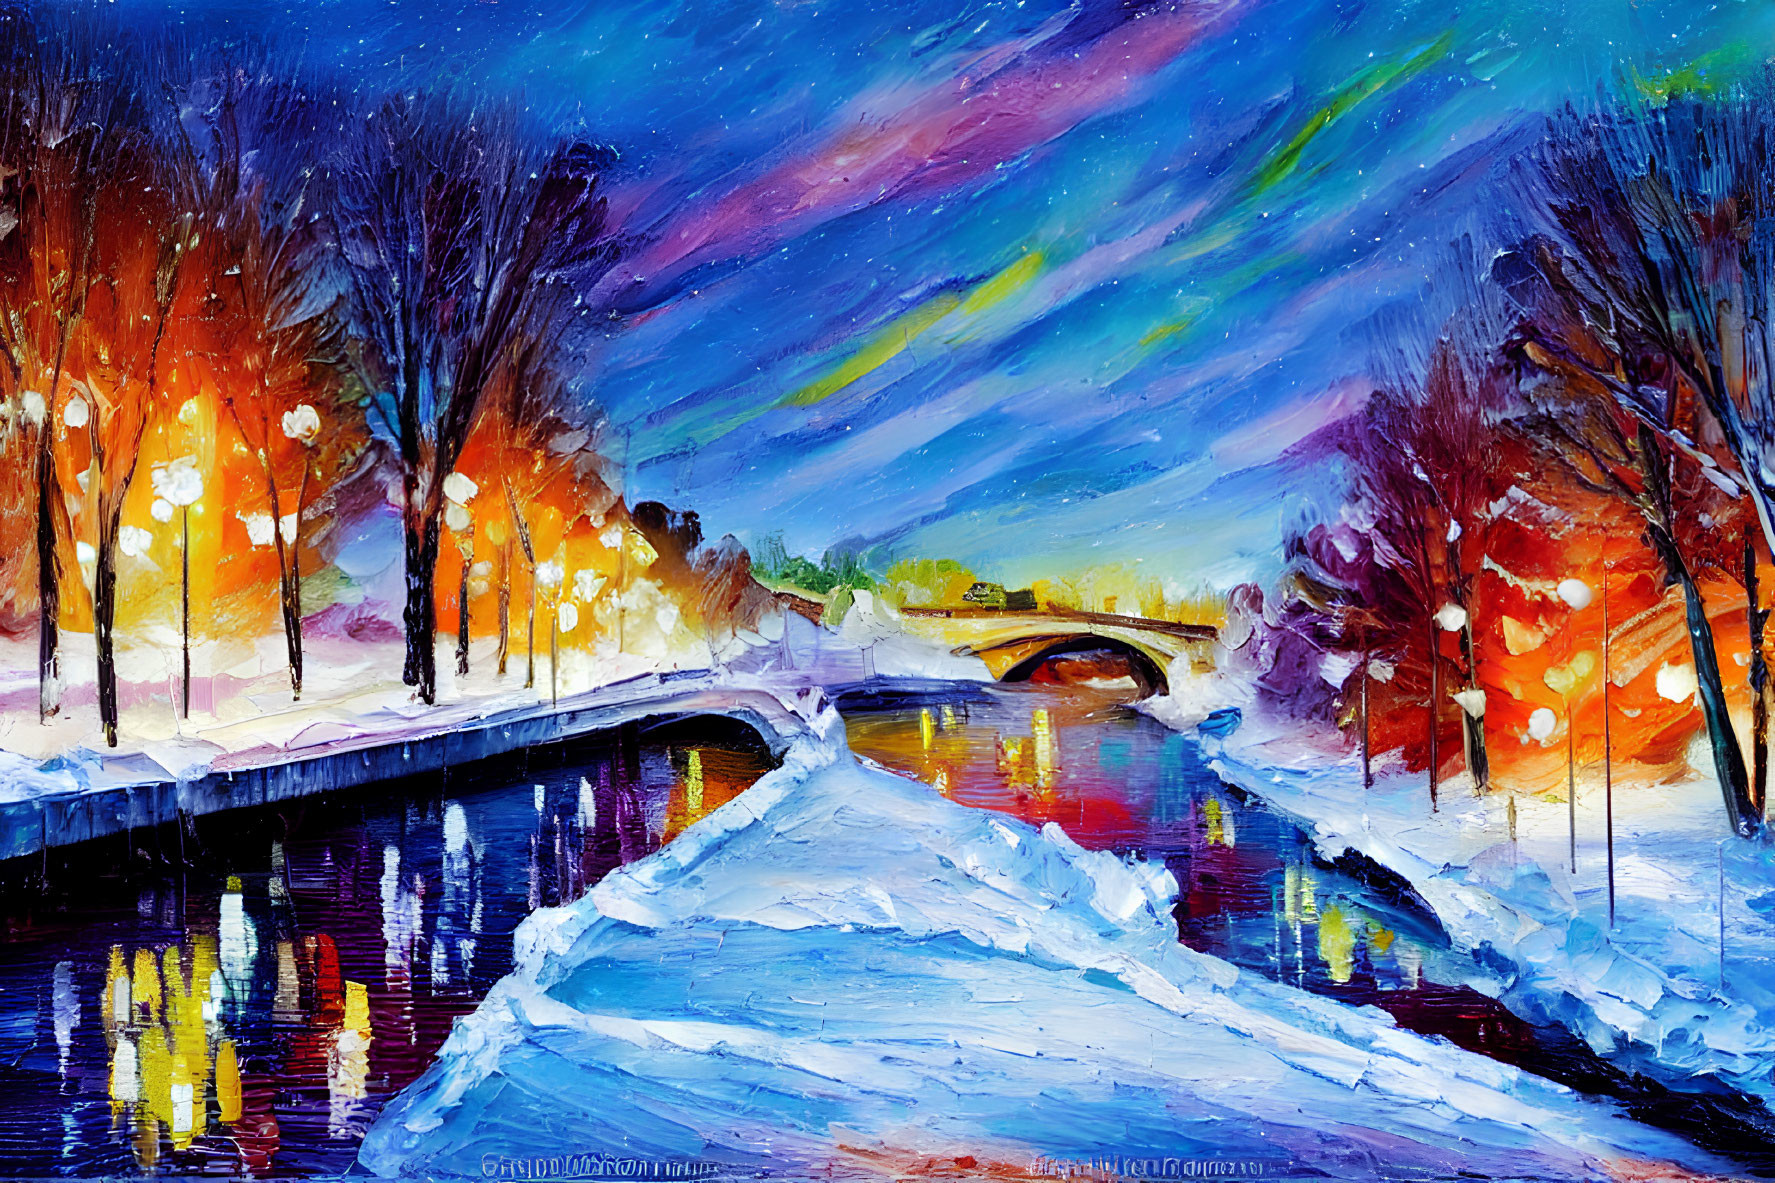 Snowy Park at Dusk: Vibrant Oil Painting of Colorful River Reflections